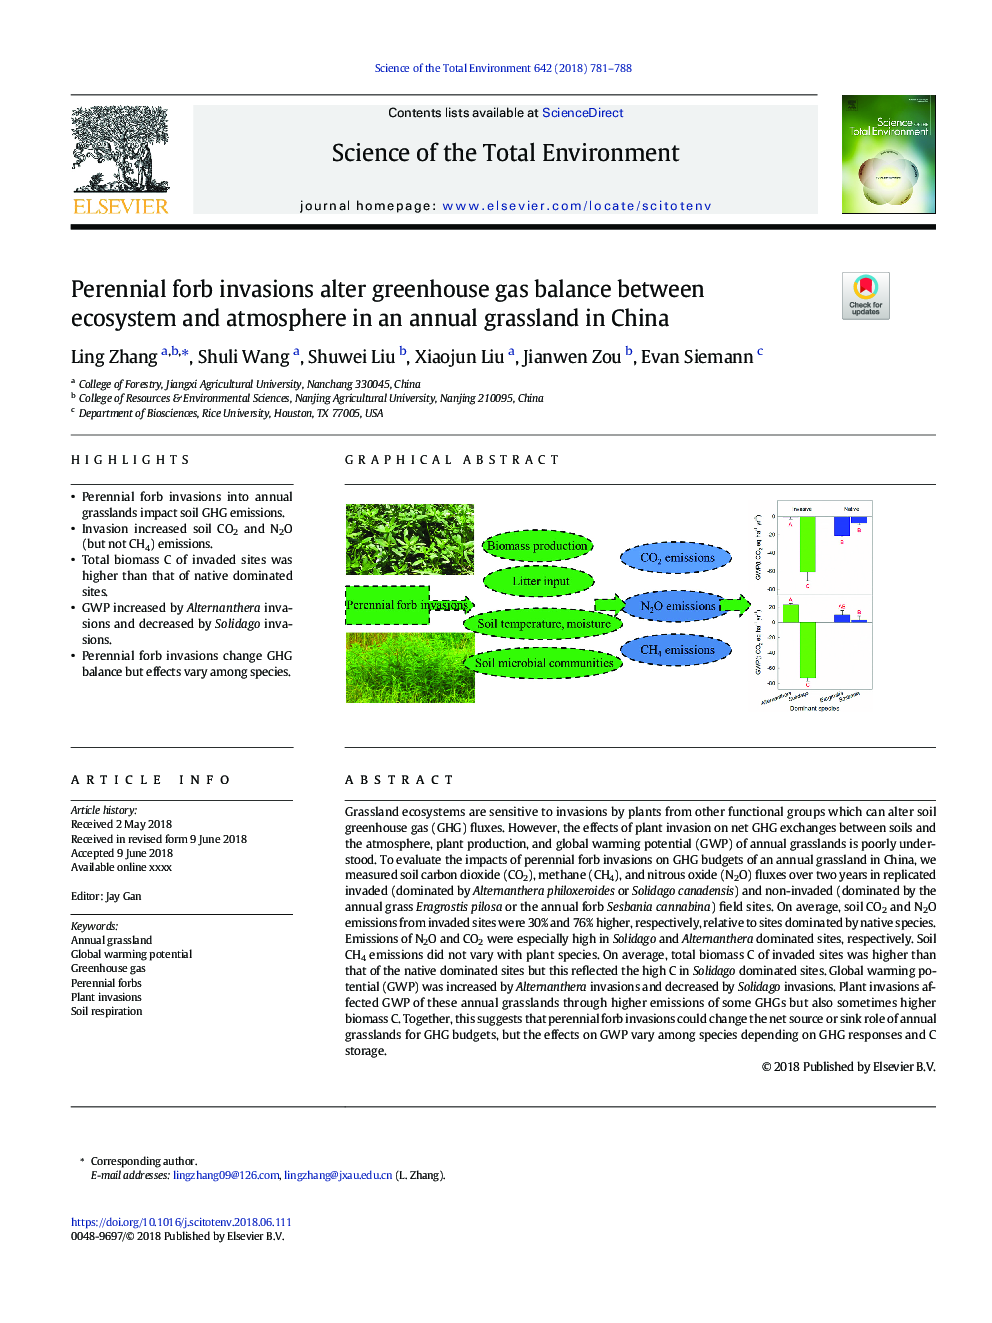 Perennial forb invasions alter greenhouse gas balance between ecosystem and atmosphere in an annual grassland in China